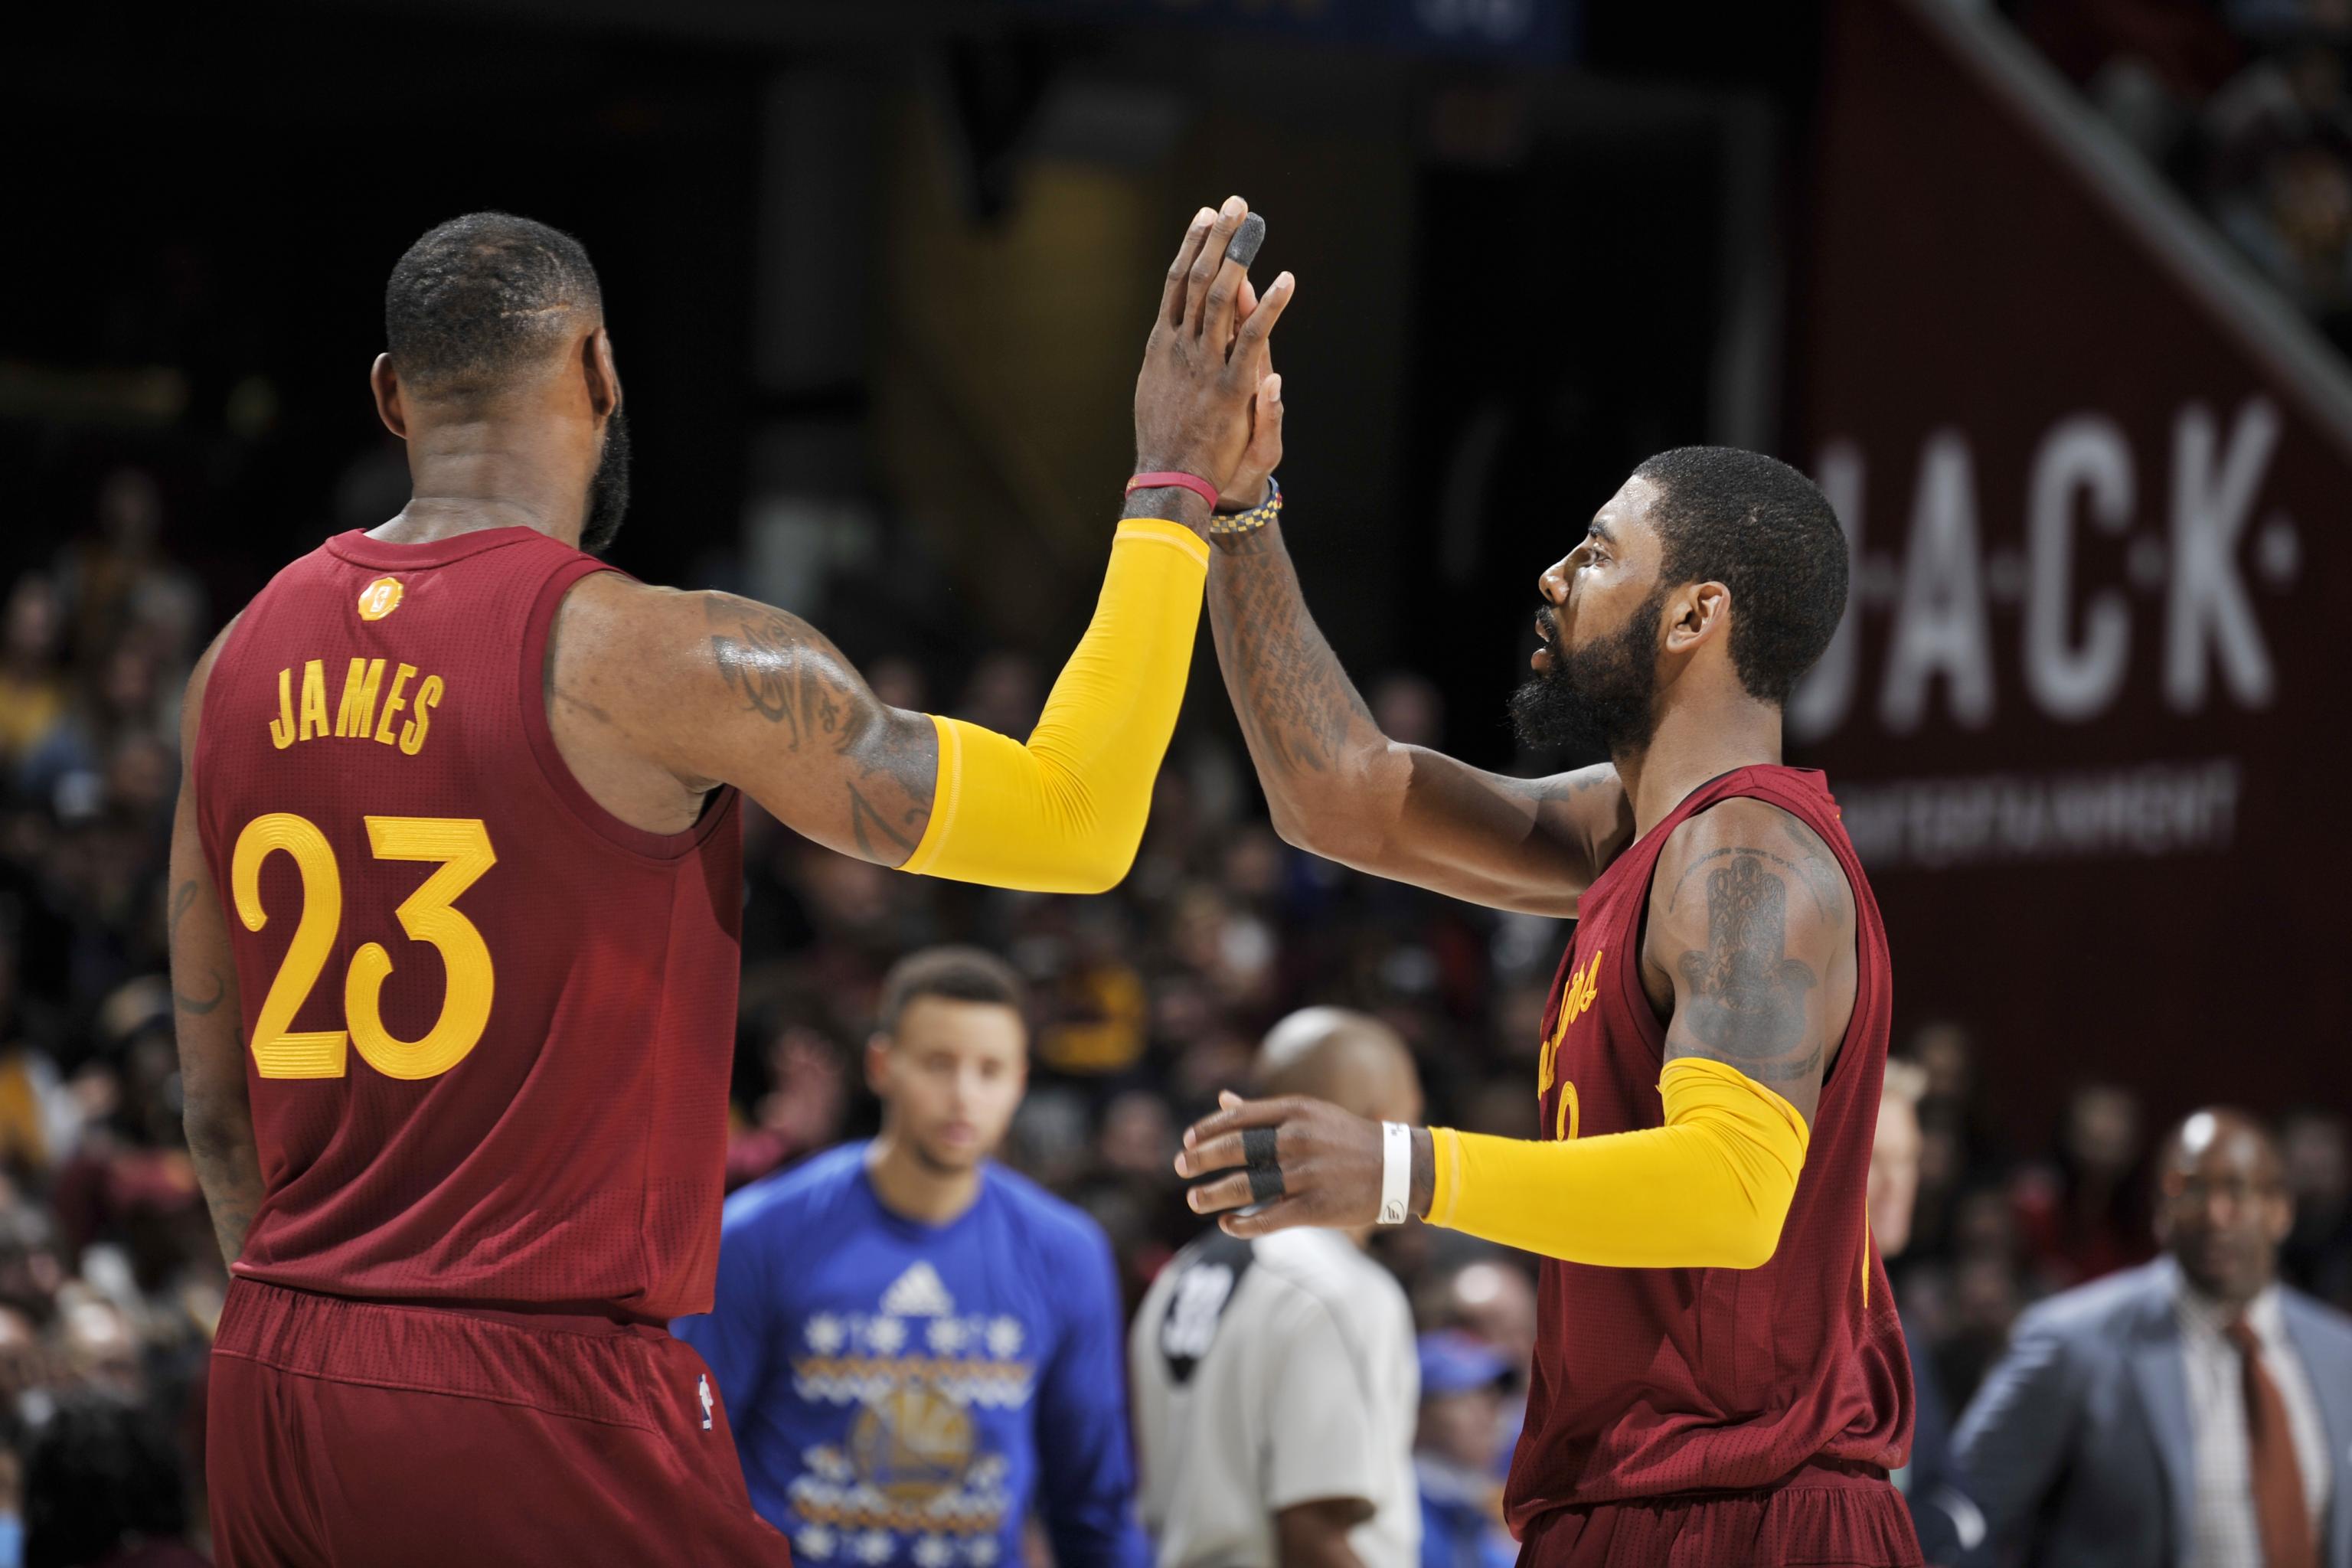 Cavaliers, Warriors renew rivalry on Christmas Day